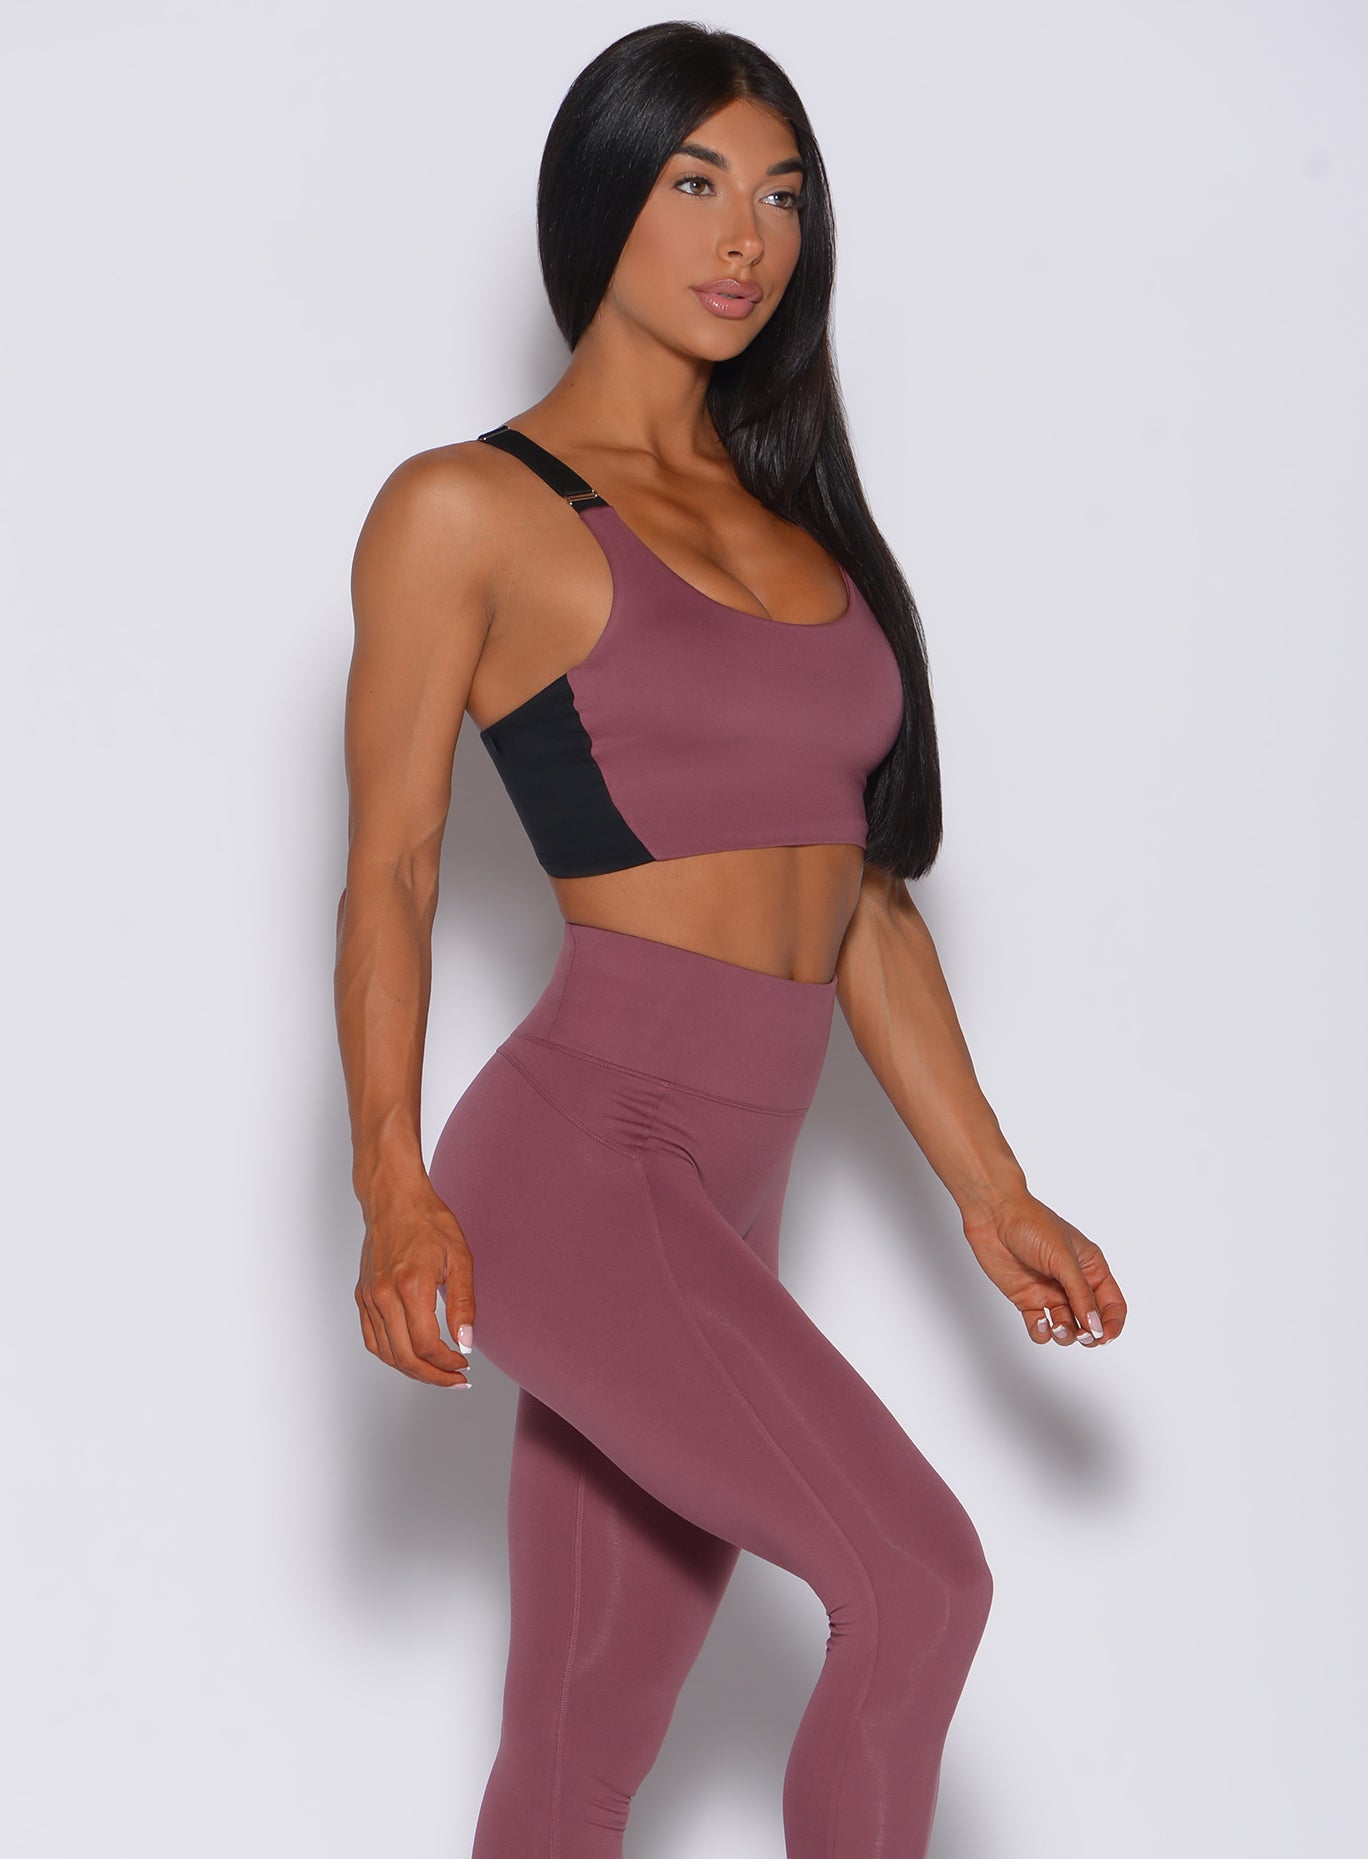 Right side profile view of a model facing forward wearing our banded sports bra in merlot color and a matching leggings